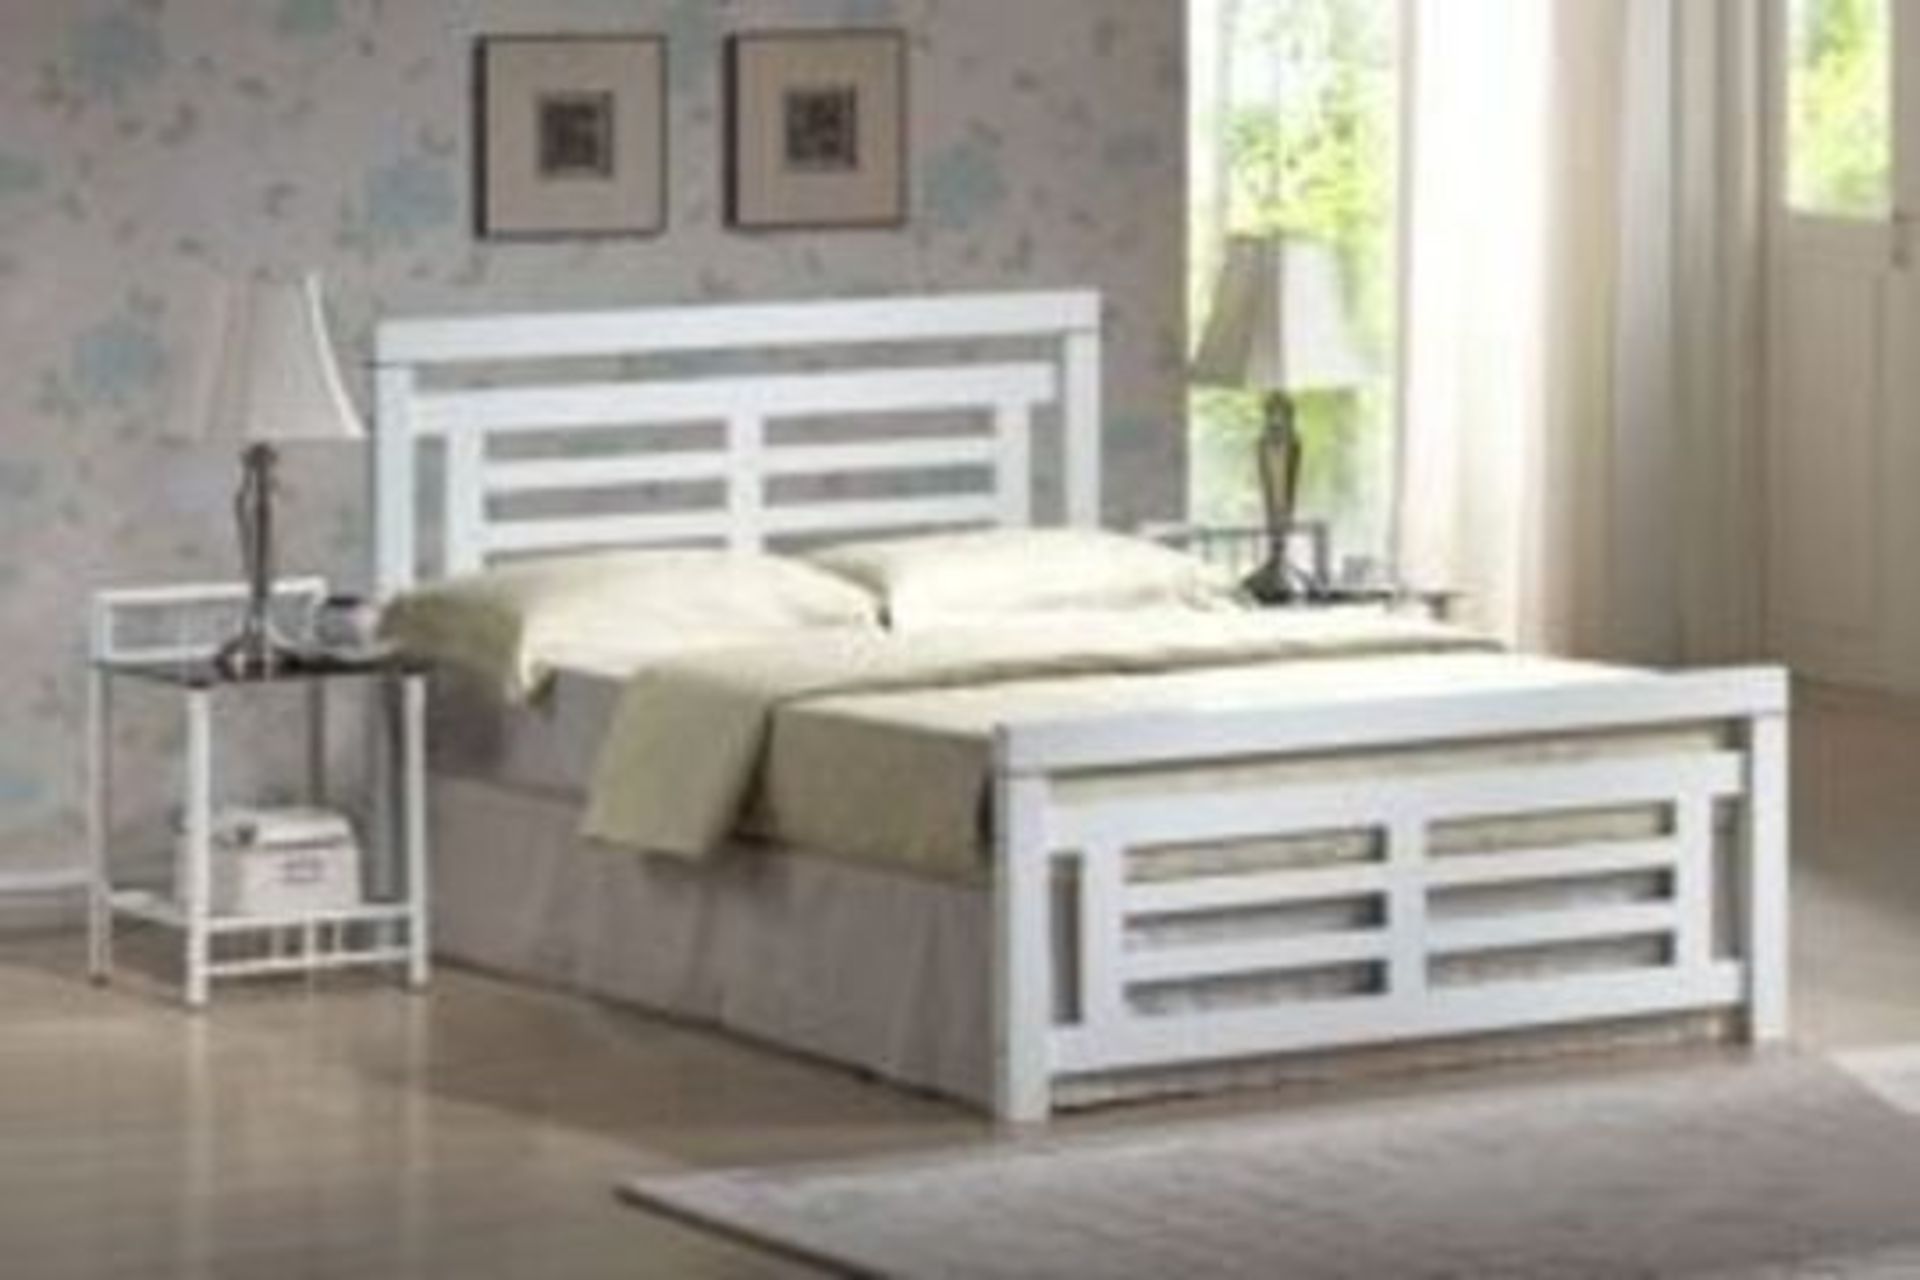 King Size Colorado Bed Beach/Black RRP £500 (Pictures Are For Illustration Purposes Only) (